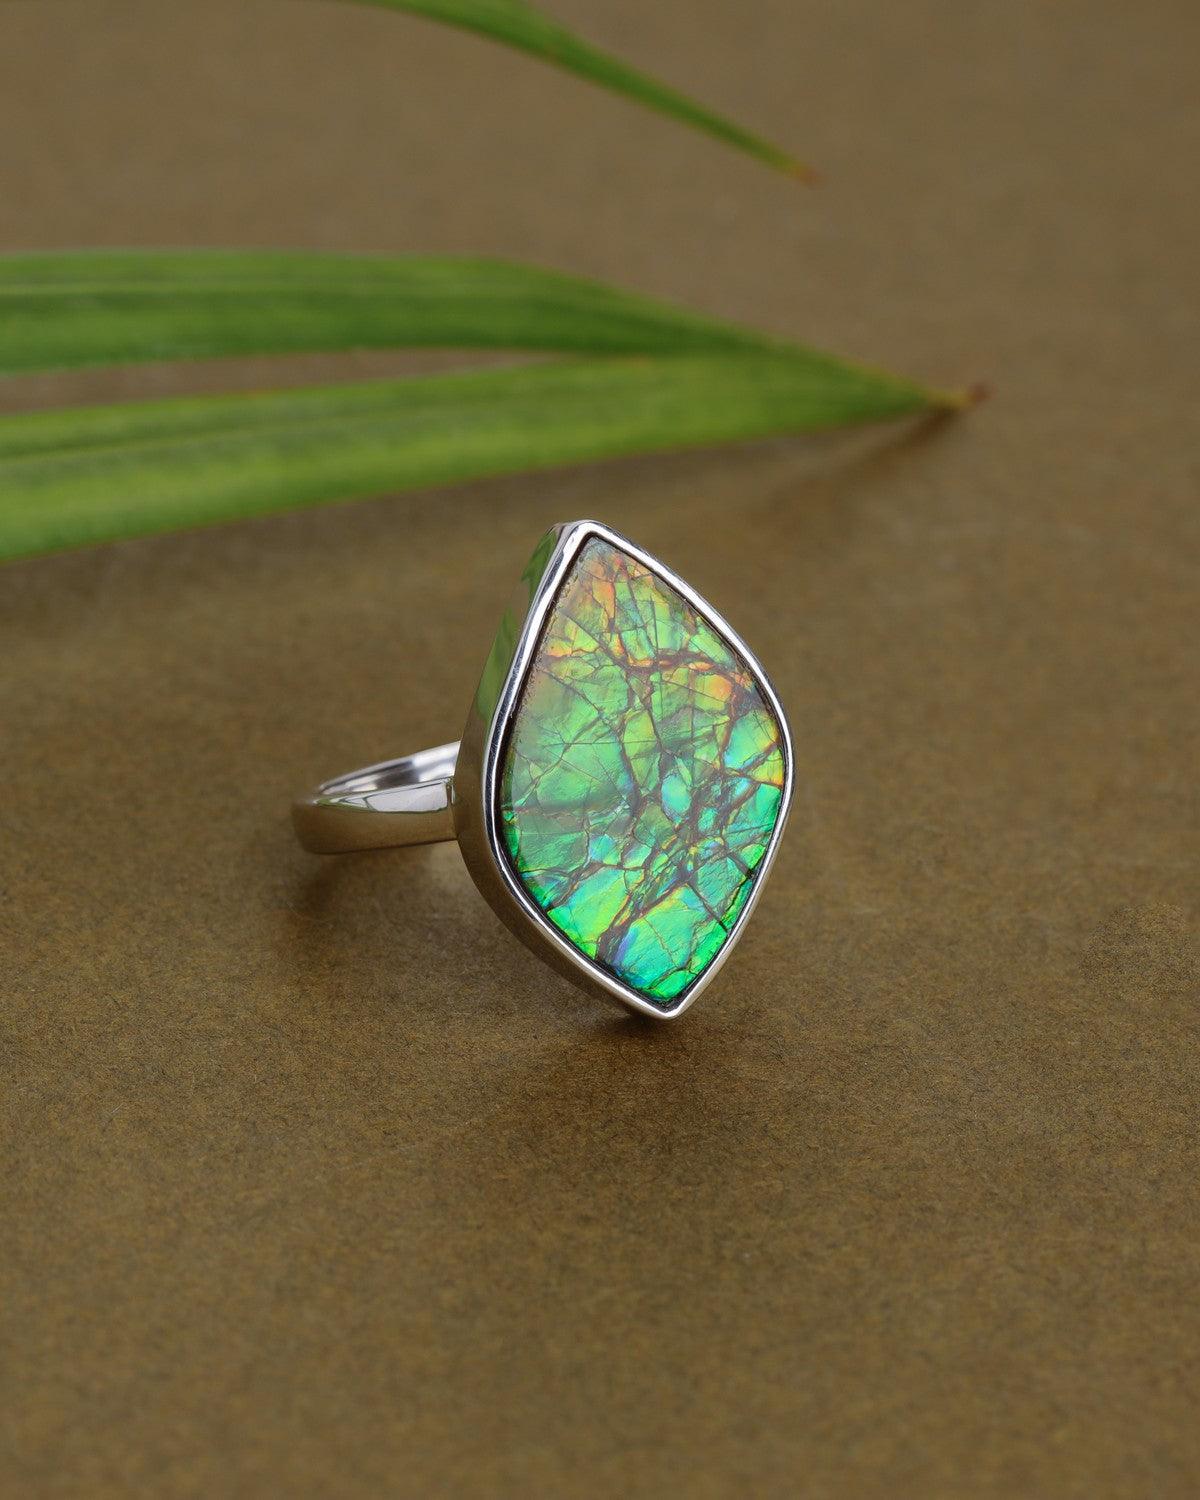 10.15 Ct. Ammolite Solid 925 Sterling Silver Statement Ring Jewelry - YoTreasure